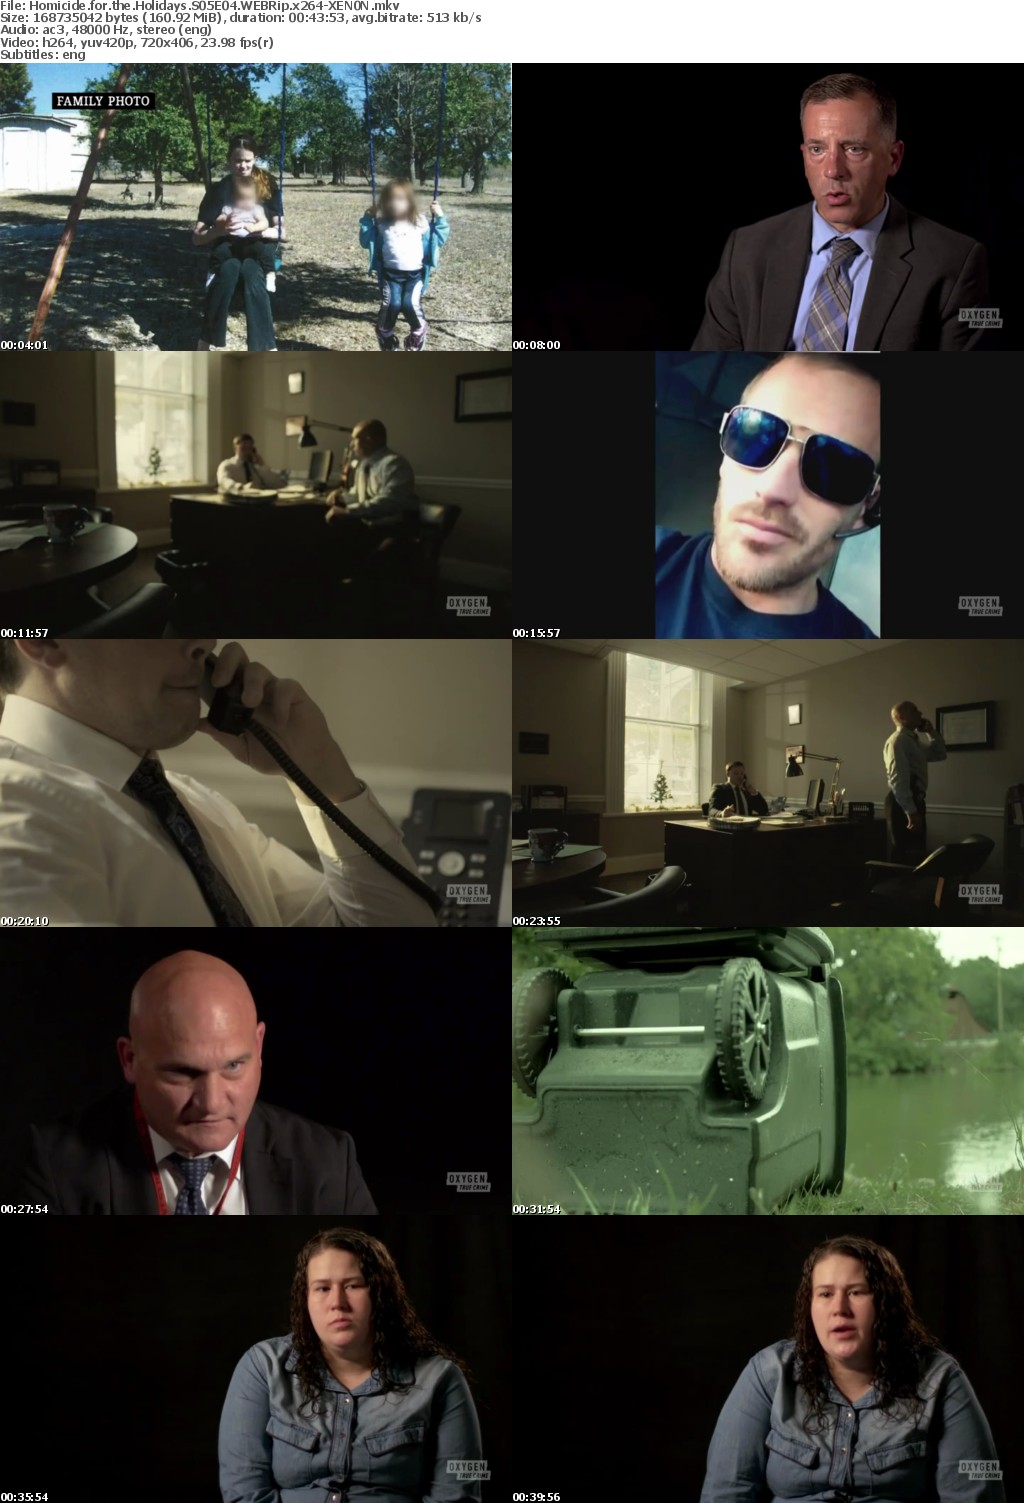 Homicide for the Holidays S05E04 WEBRip x264-XEN0N